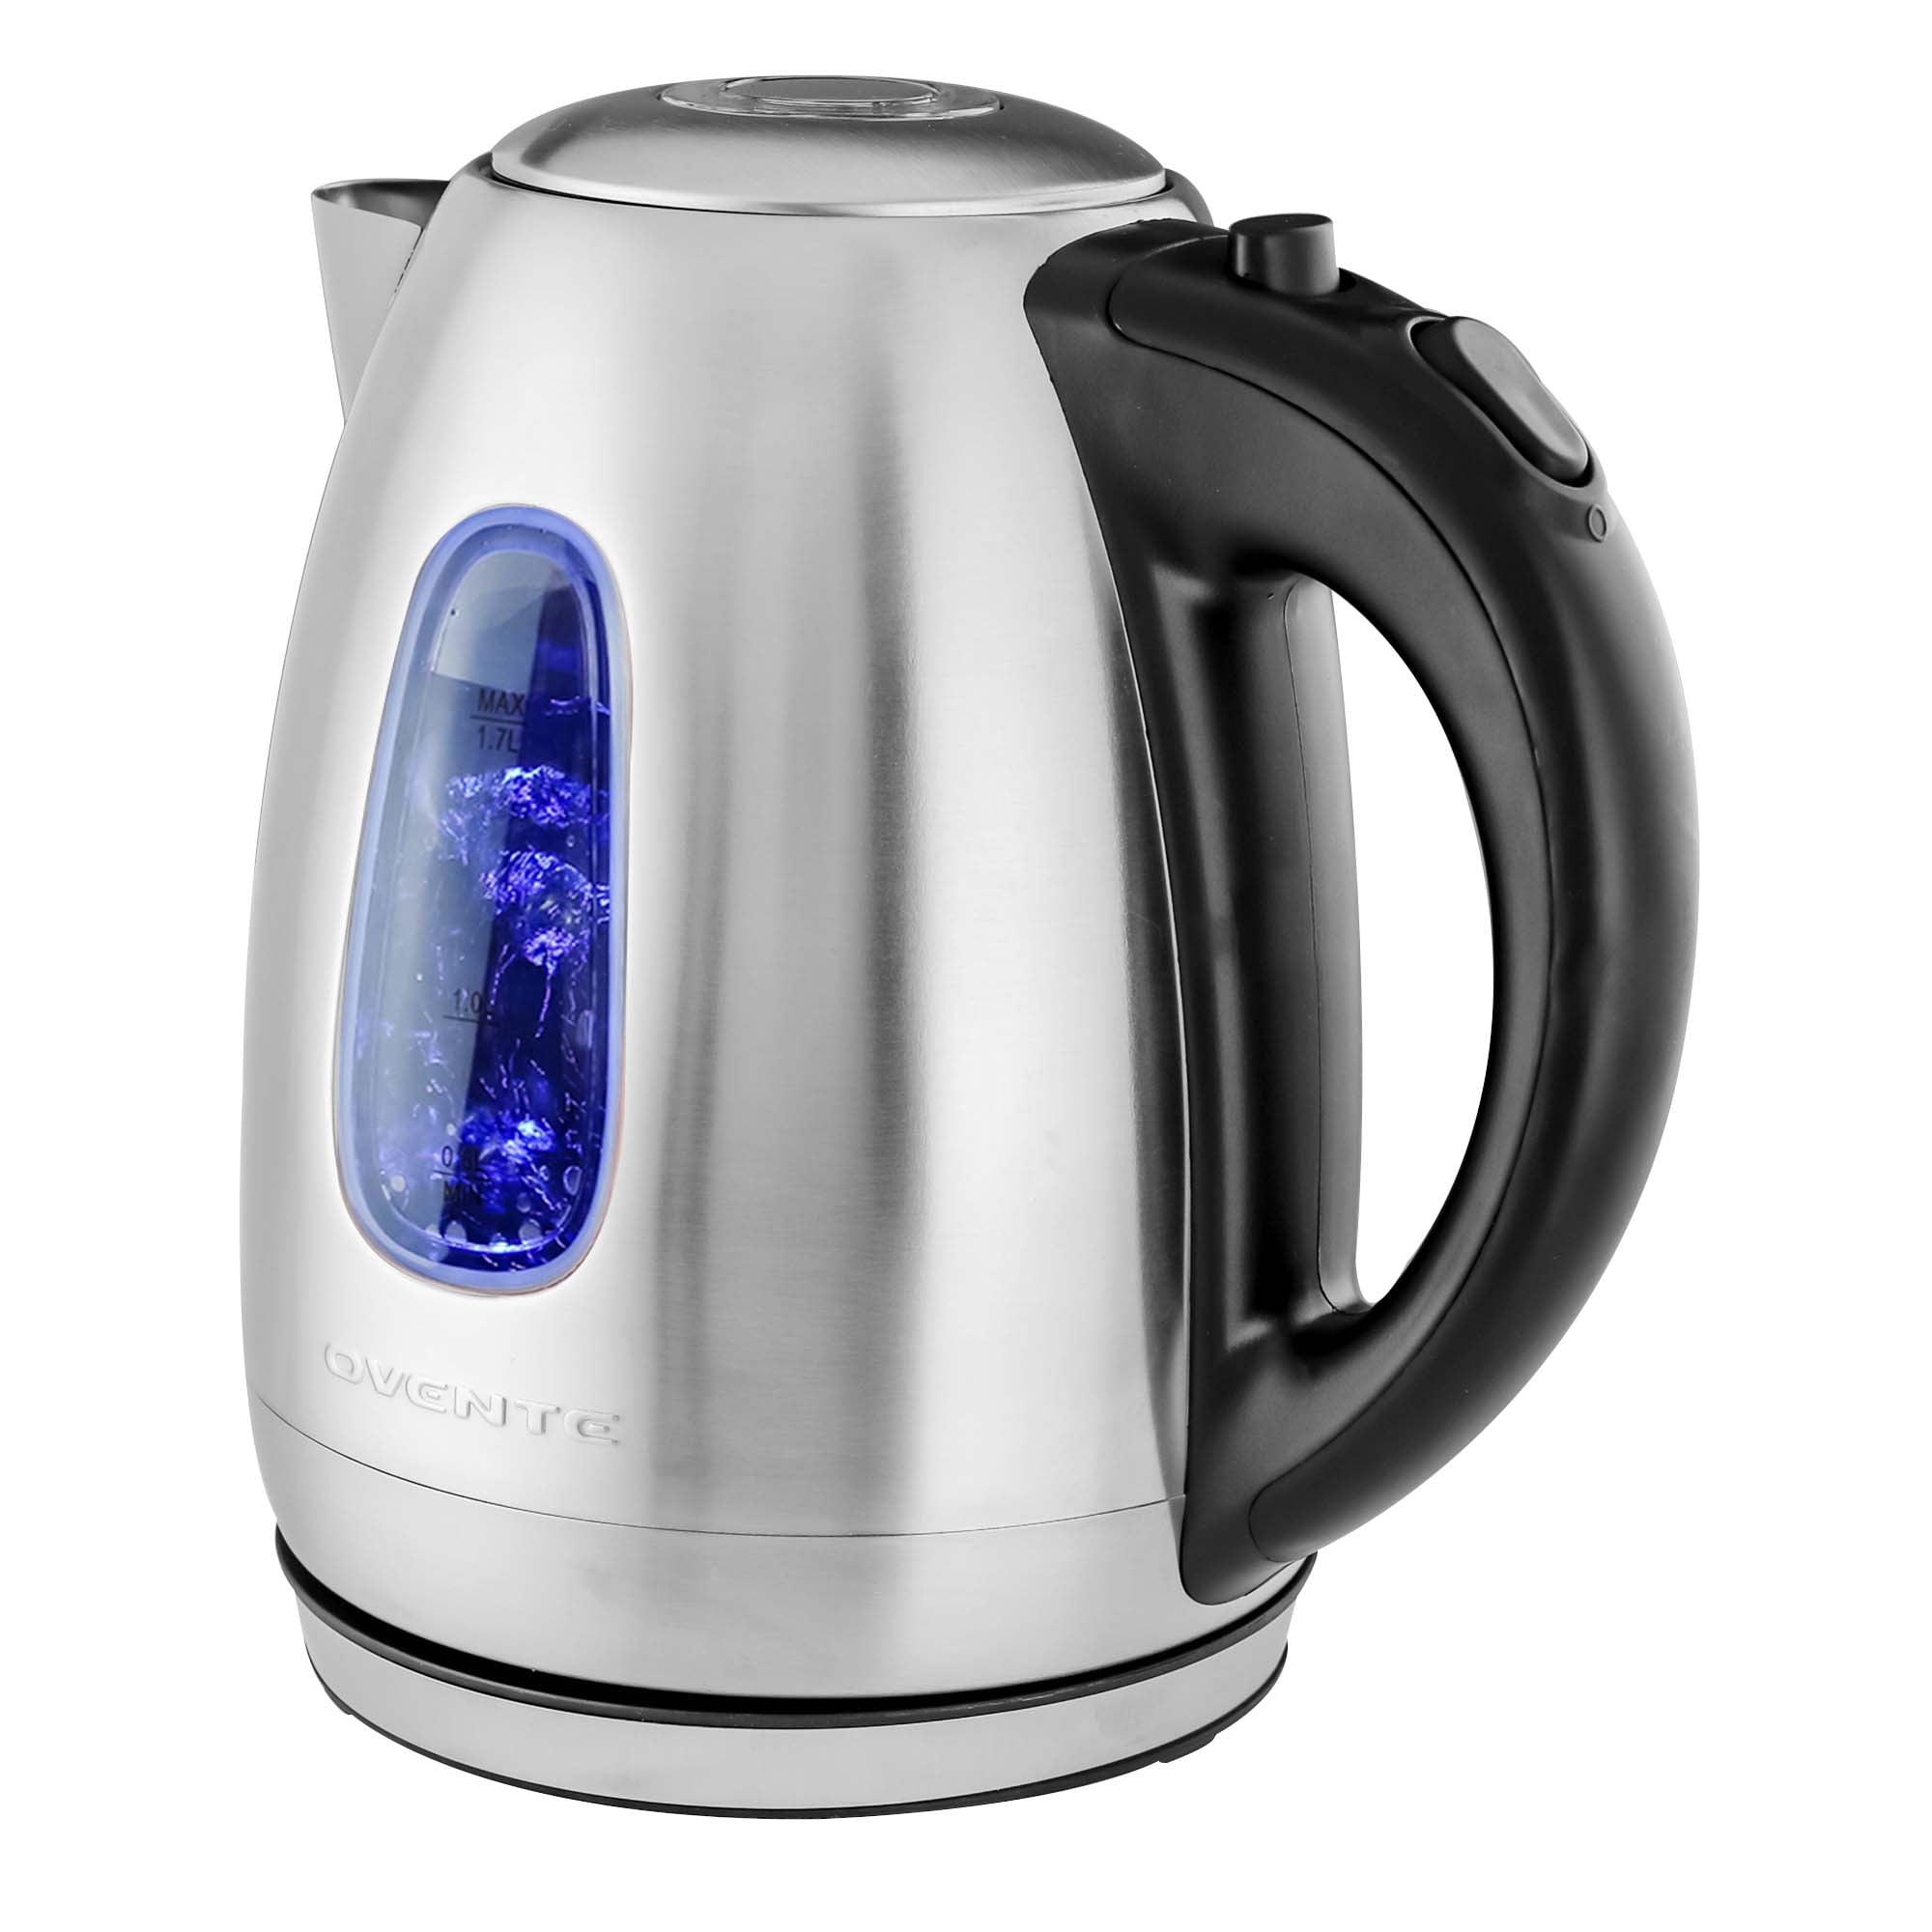 OVENTE Electric Kettle Stainless Steel Instant Hot Water Boiler BPA Free  1.7 Liter 1100 Watts Fast Boiling with Cordless Body and Automatic Shut Off